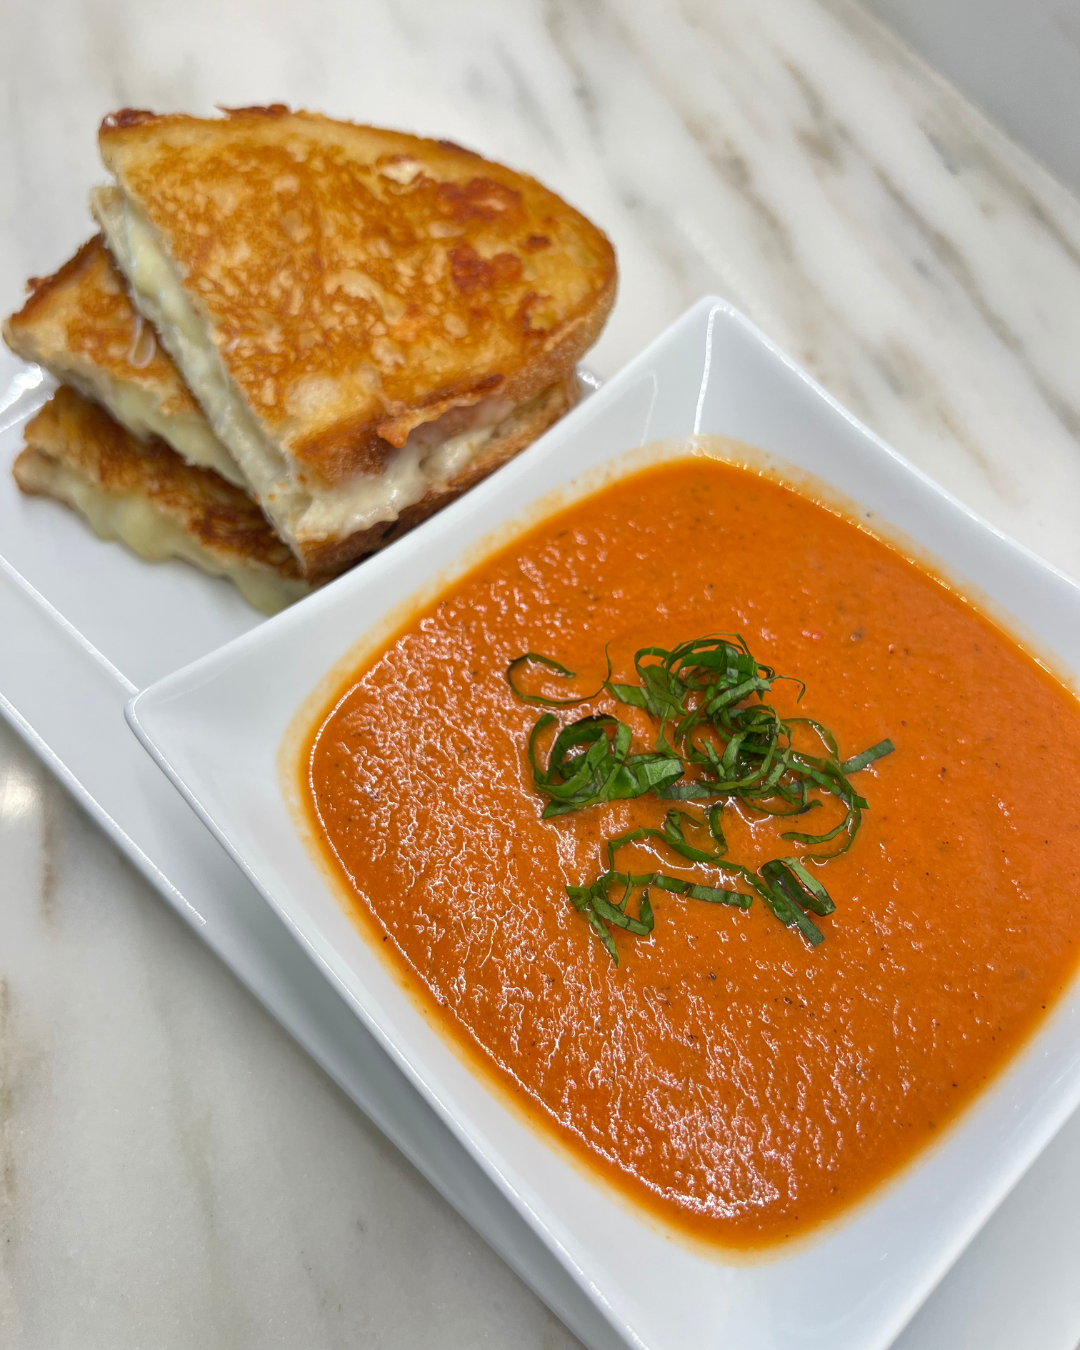 Tomato and Basil Soup with Grilled Cheese

recipe, recipe blog, appetizer, soup recipe, tomato soup, basil soup, grilled cheese, recipe tasting, hosting